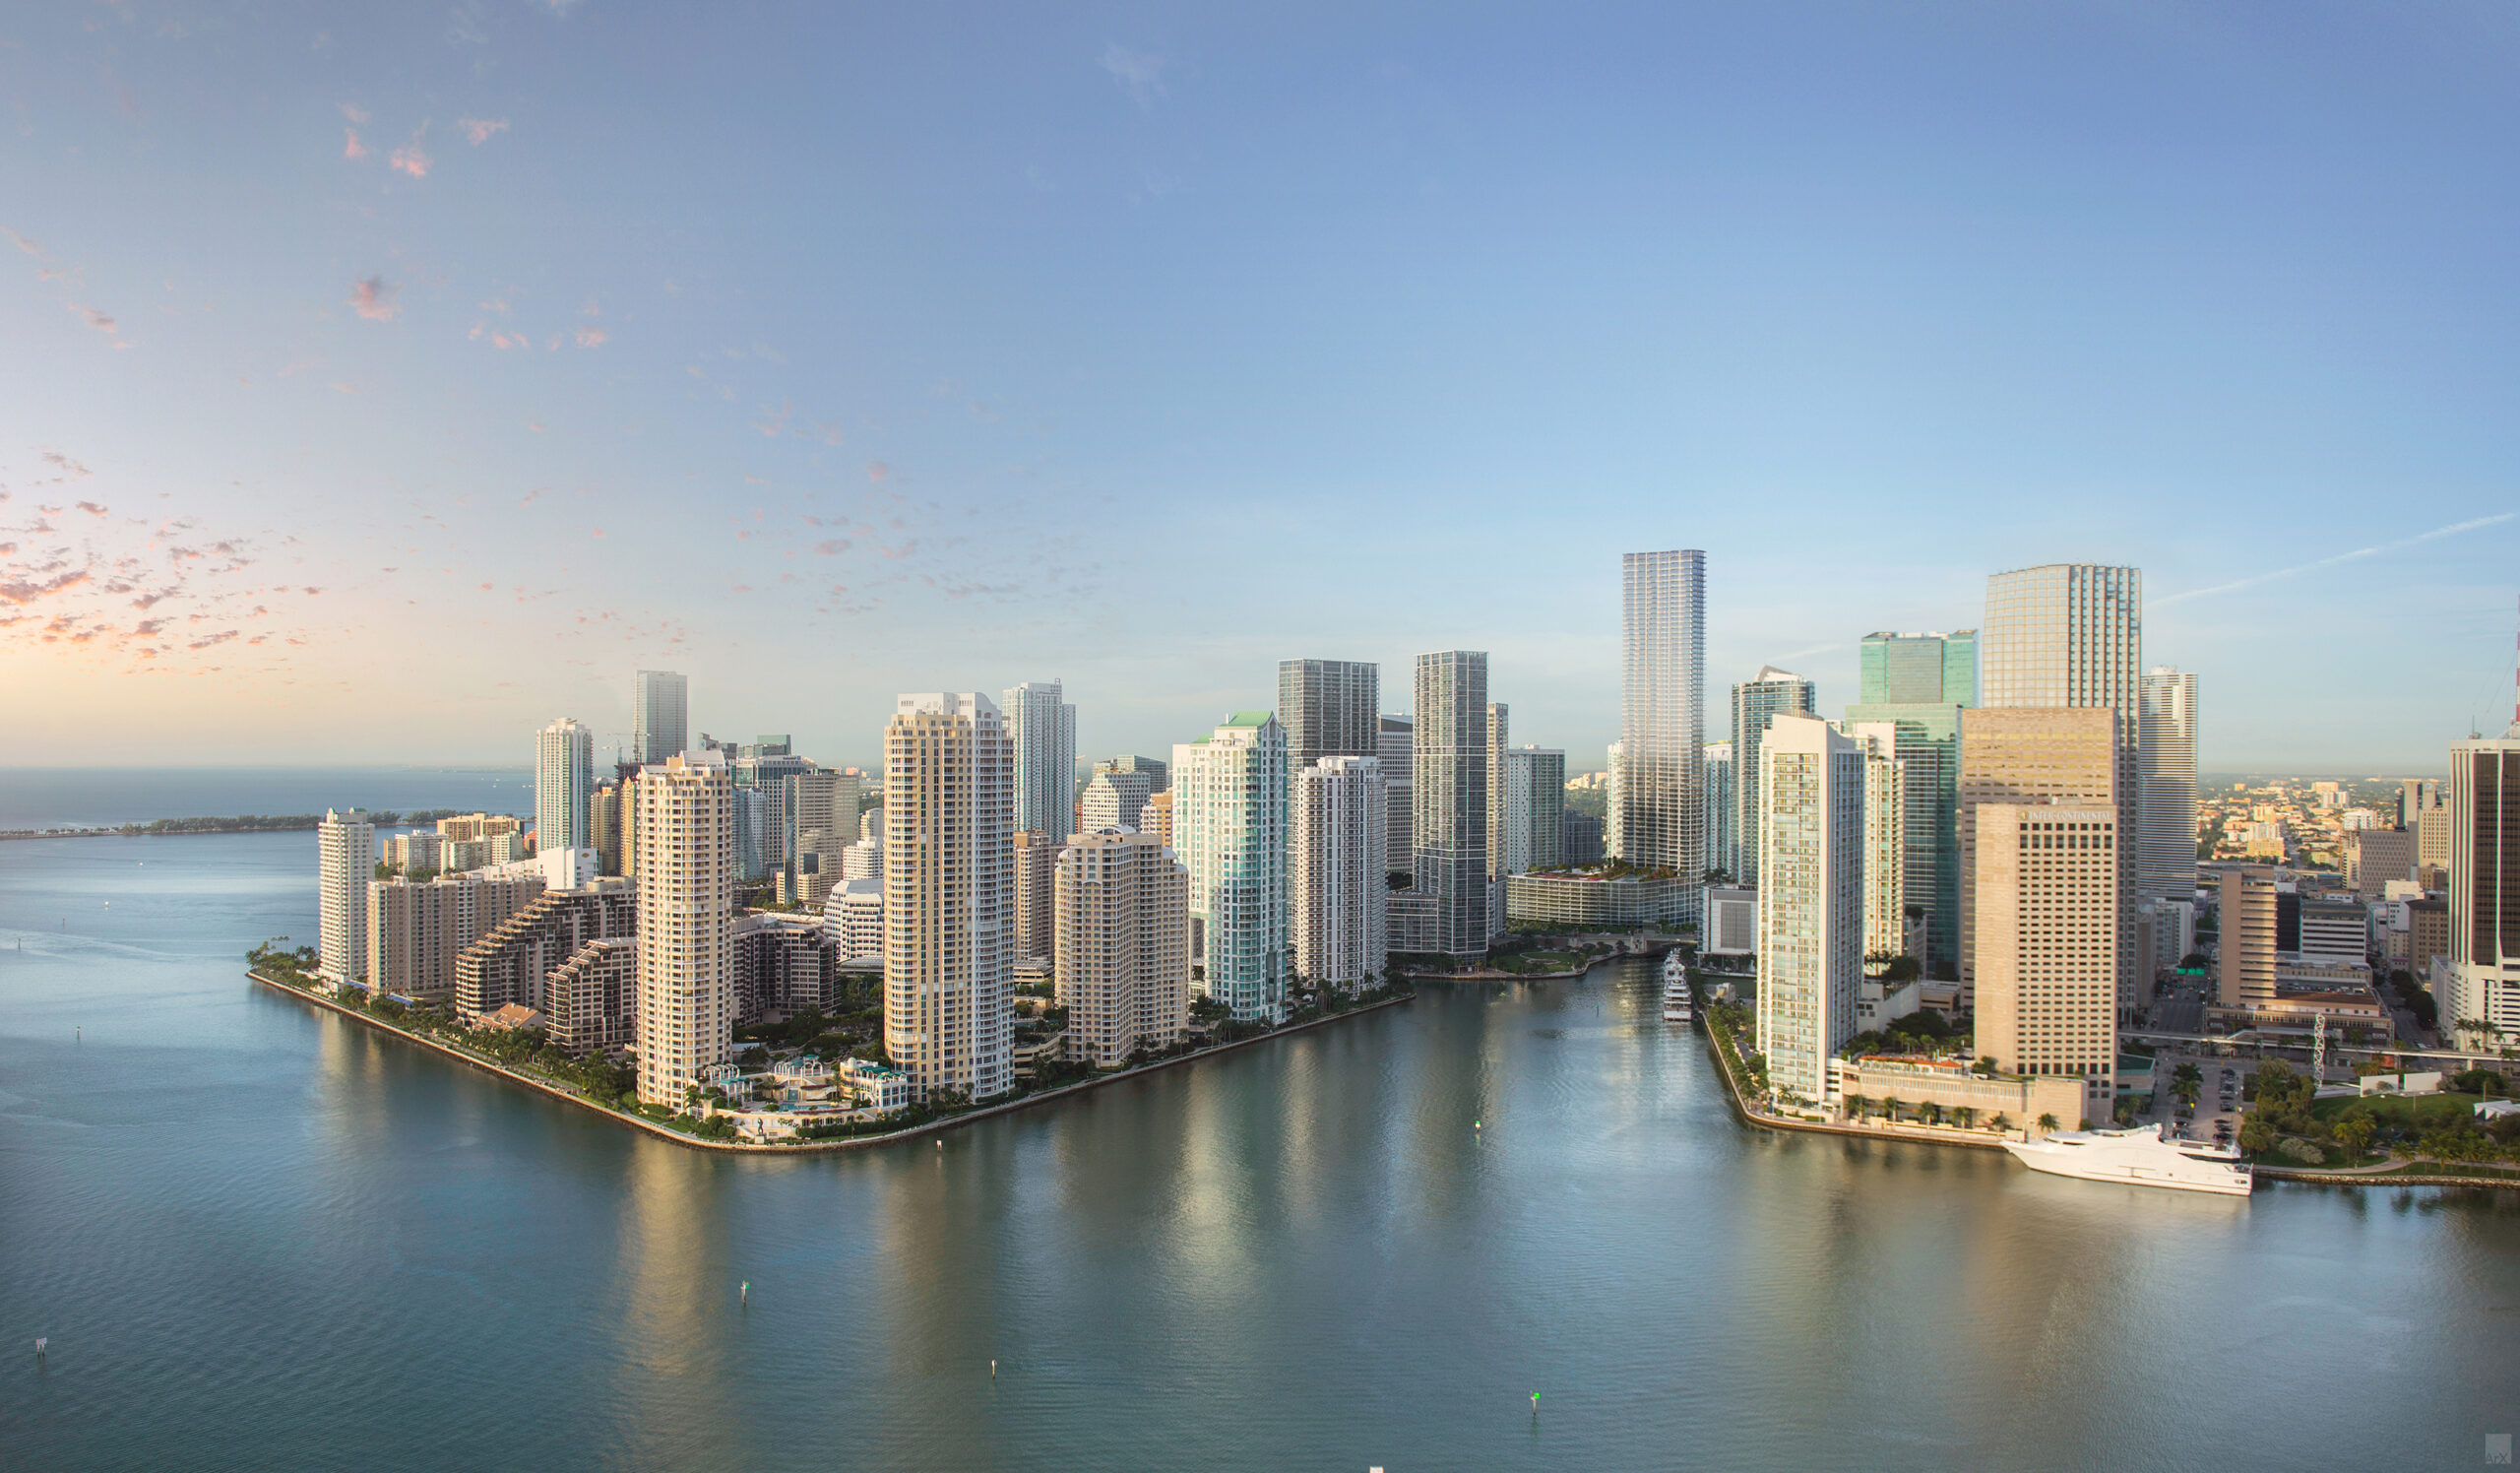 Excavation Permit Issued for Baccarat Residences Site in Miami’s Financial District